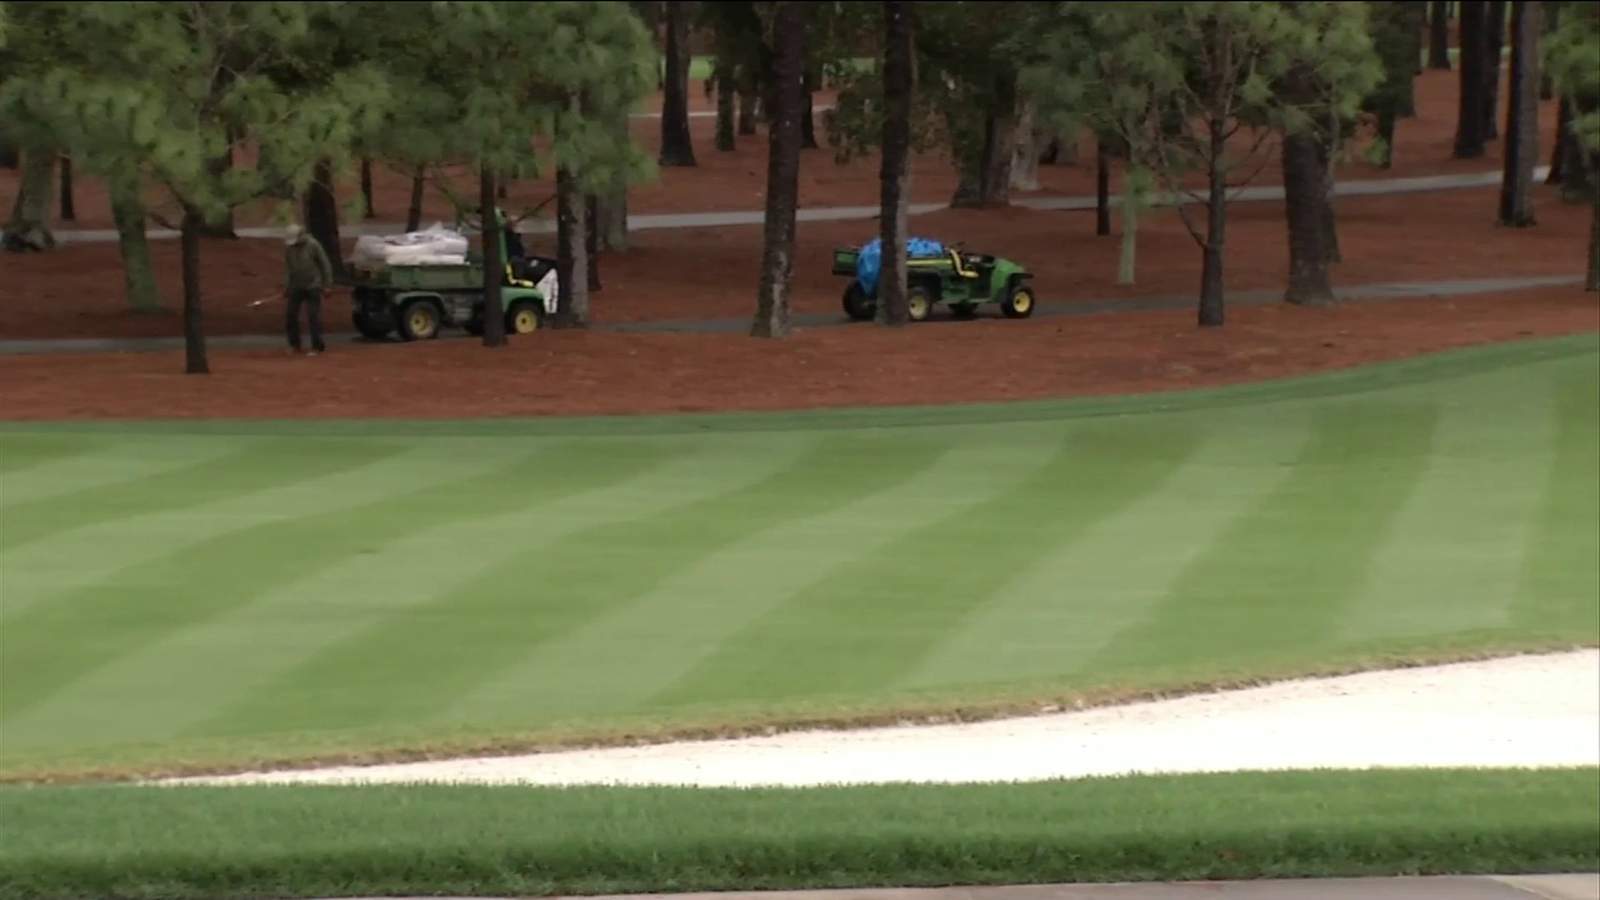 TPC Sawgrass agronomy team works year-round to get course ready for The Players